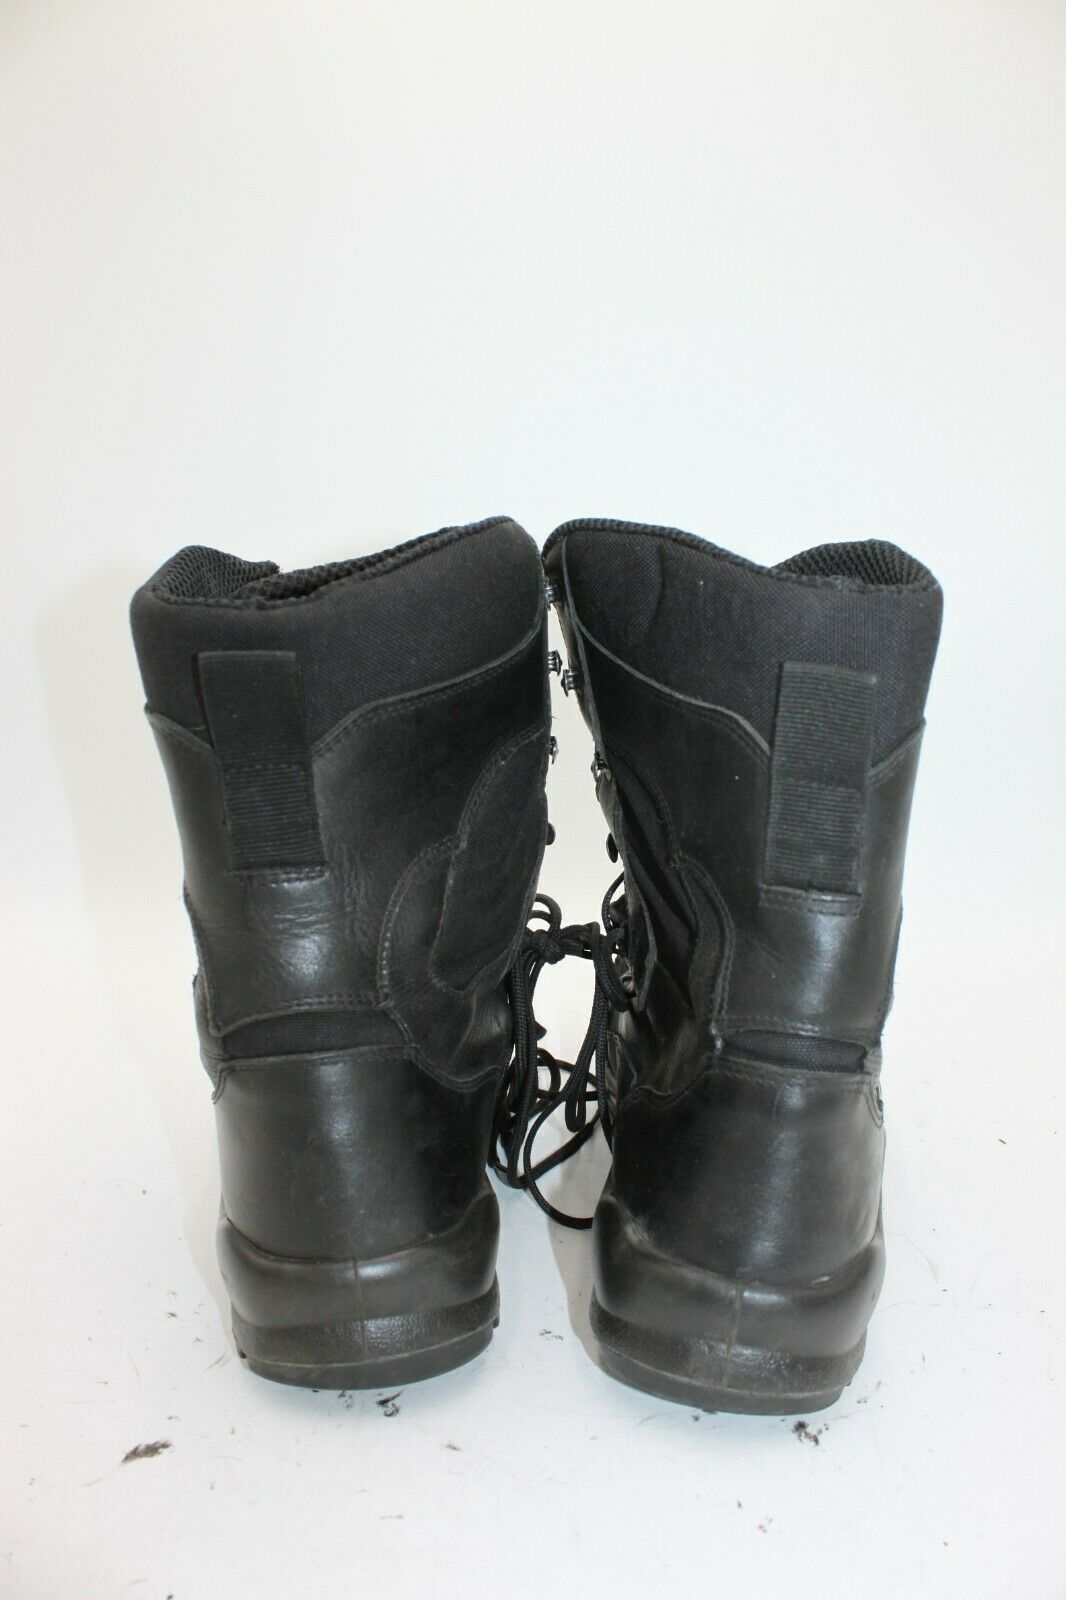 Austrian Military Jungle Combat Boots Stumpp & Baier Used Size 11.5 US (ASB4745115)